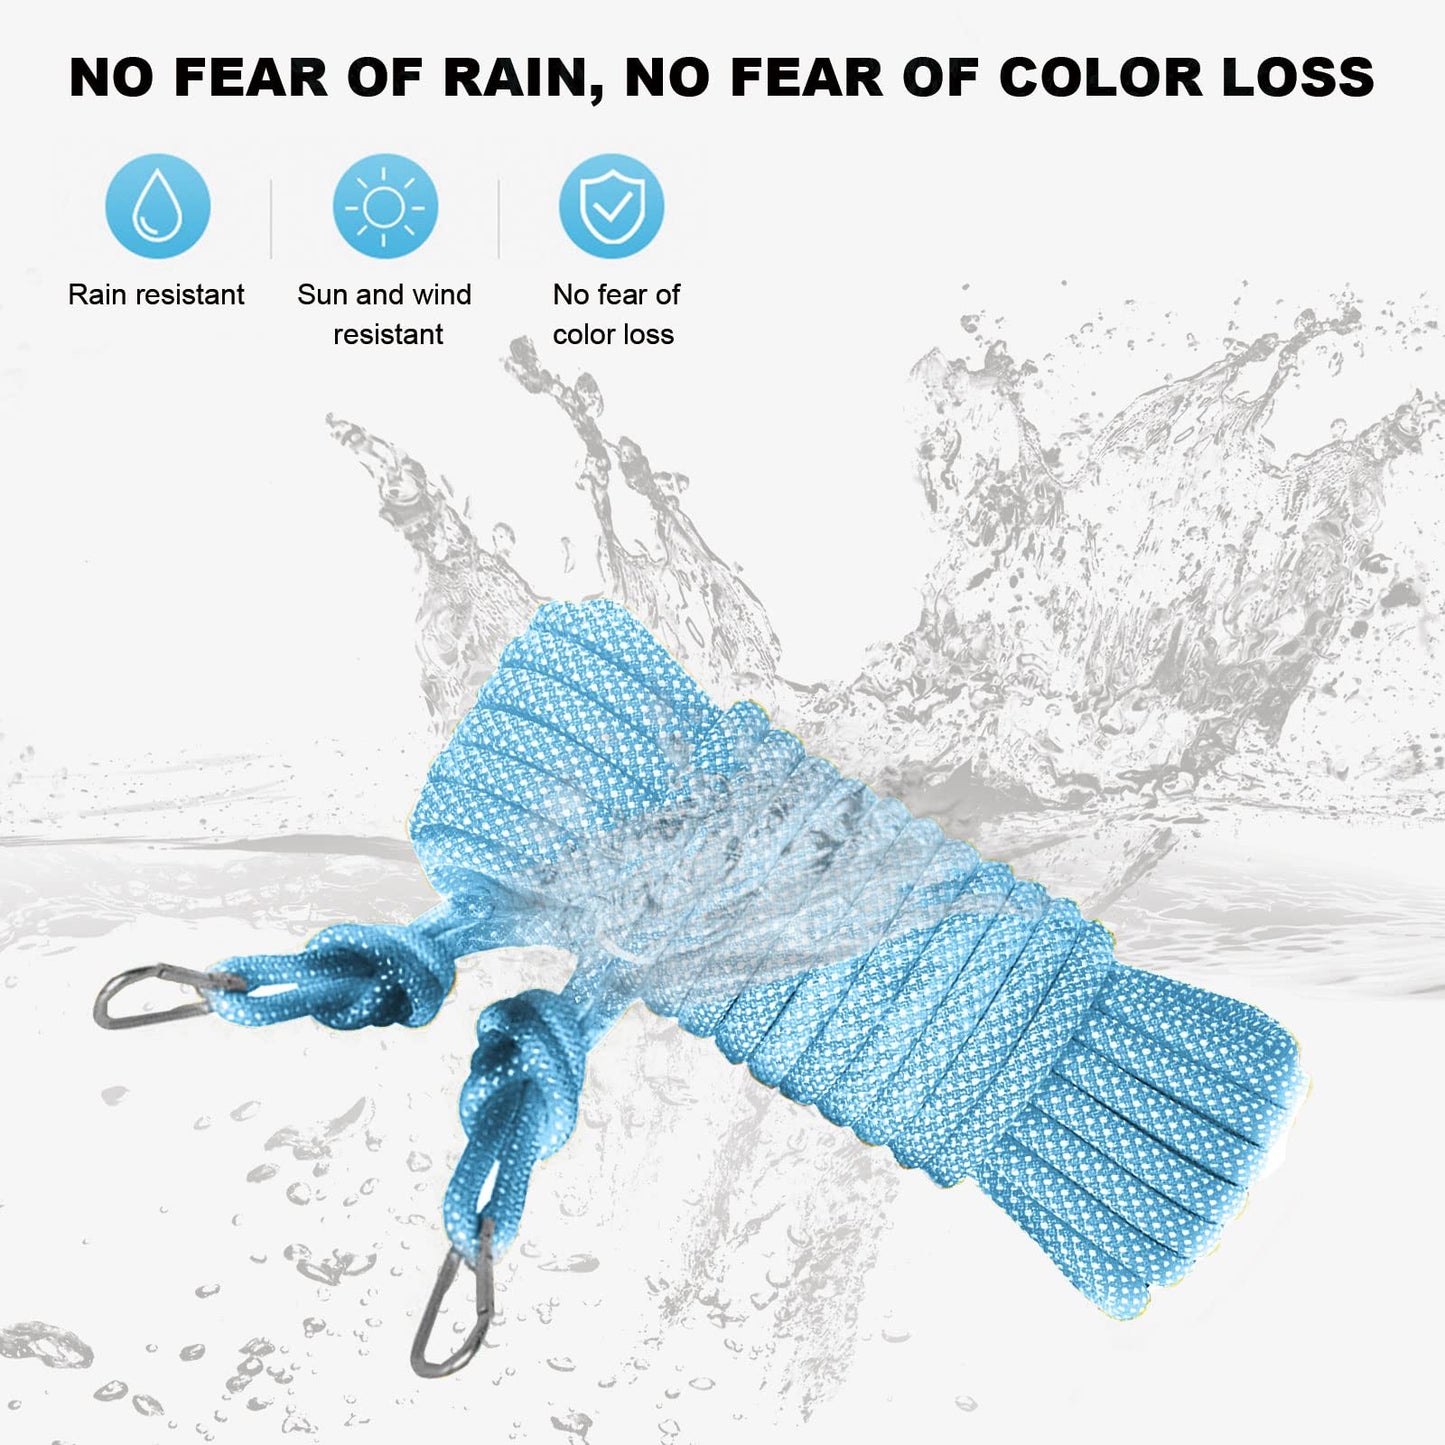 Washing Rope, 15m Quality Strong Woven Clothes Line with Two Metal Hooks,Heavy Duty Rust-proof and Waterproof Laundry String Prop String for Camping Garden Garage(Blue)